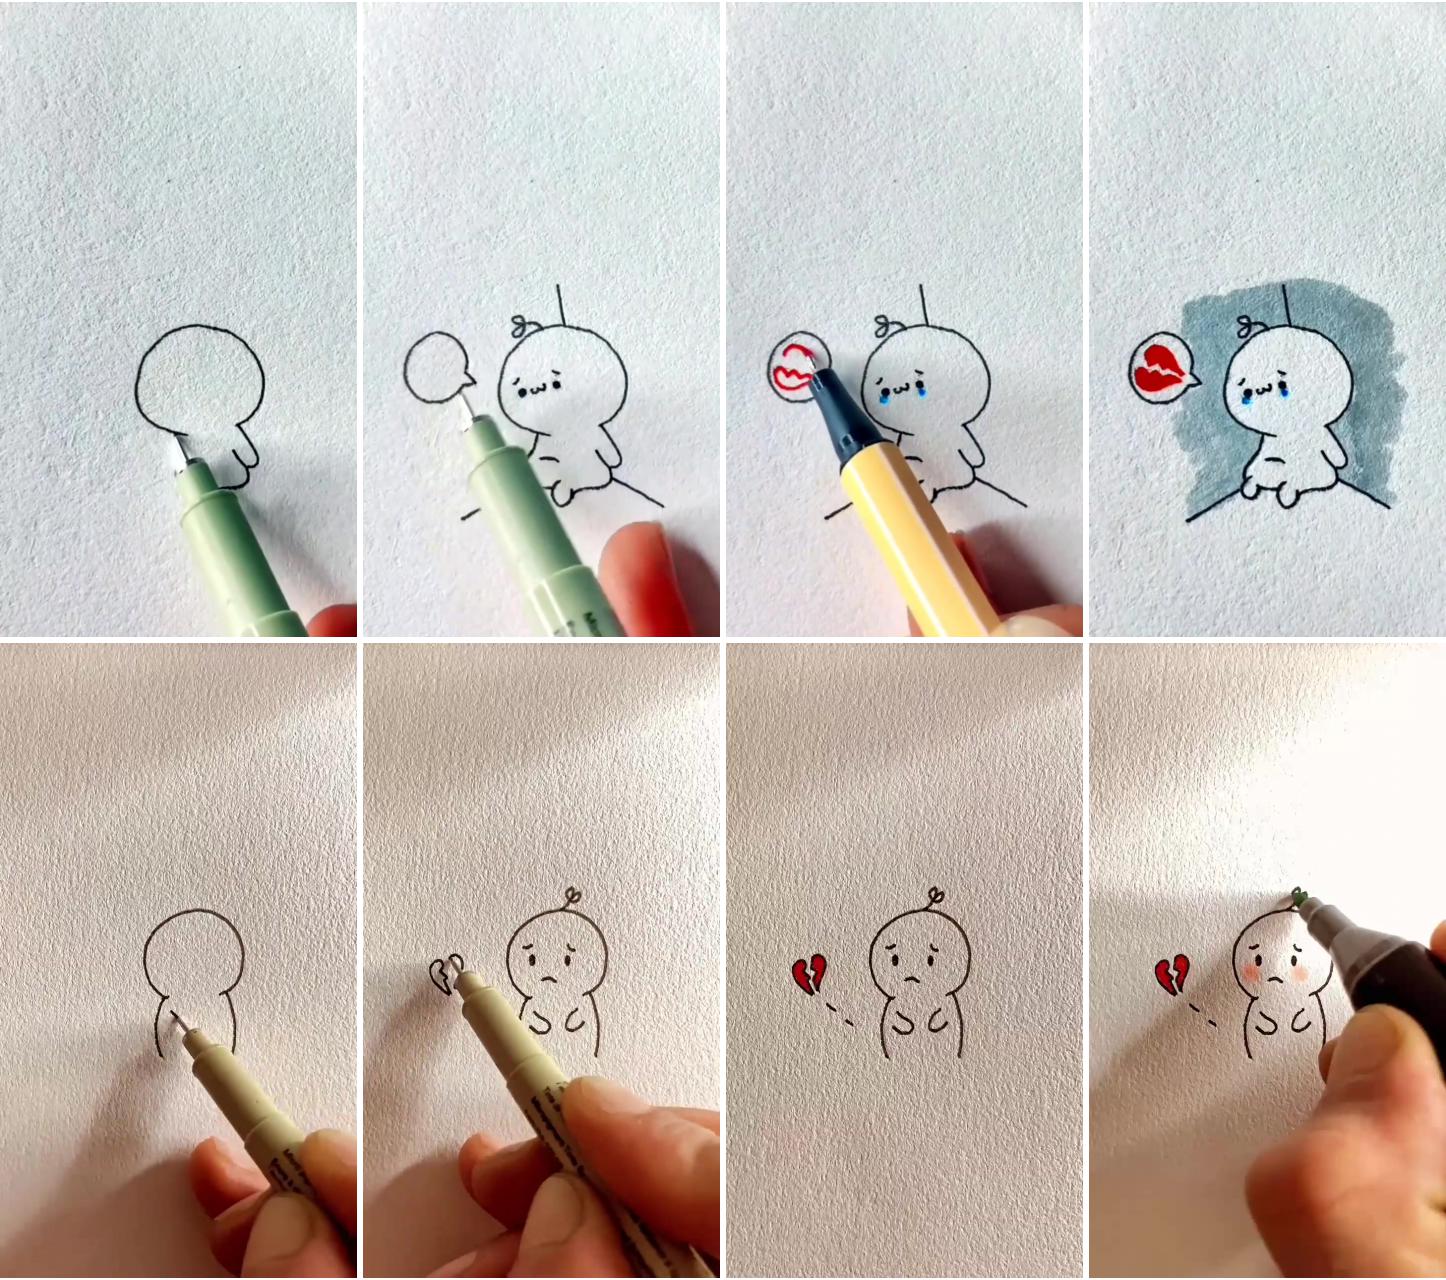 Are you still thinking about her/him satisfying art #arts #satisfying #artwork #painting | cute doodles drawings